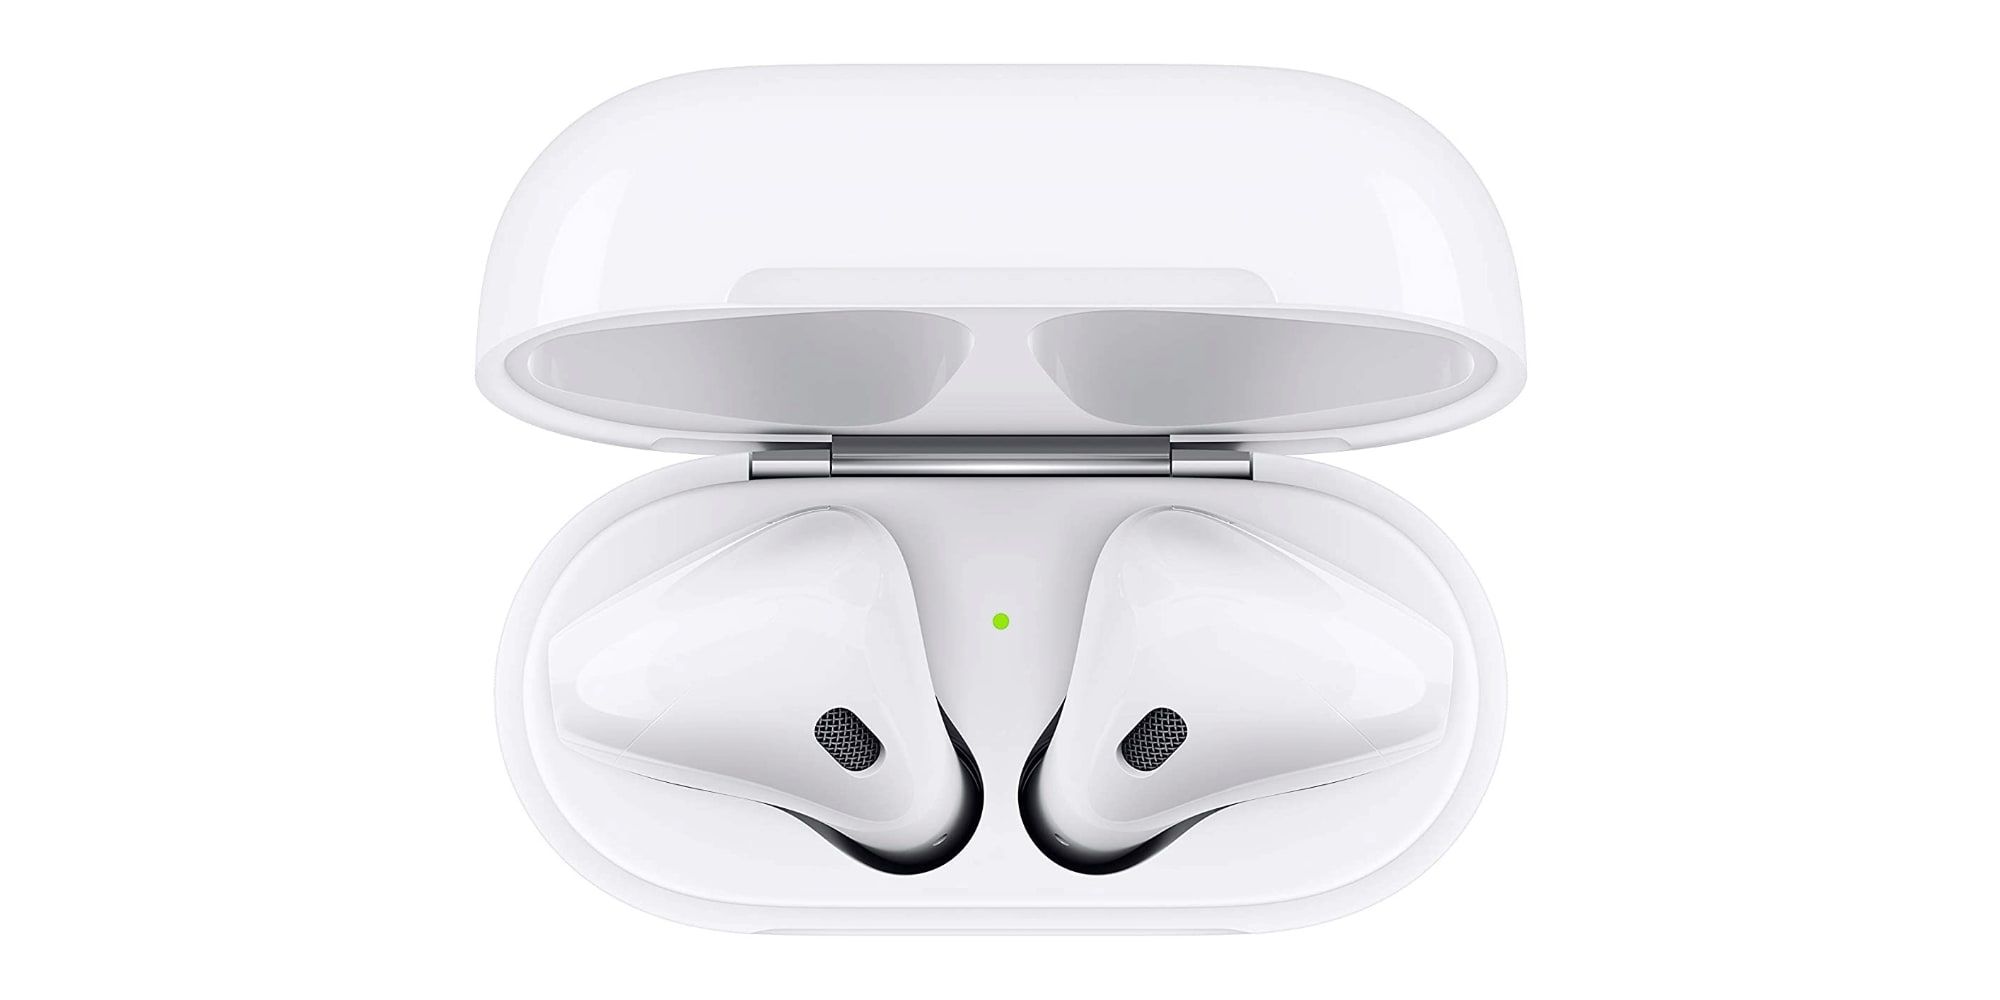 Apple AirPods Black Friday Deal: Listen Wirelessly For Just $110